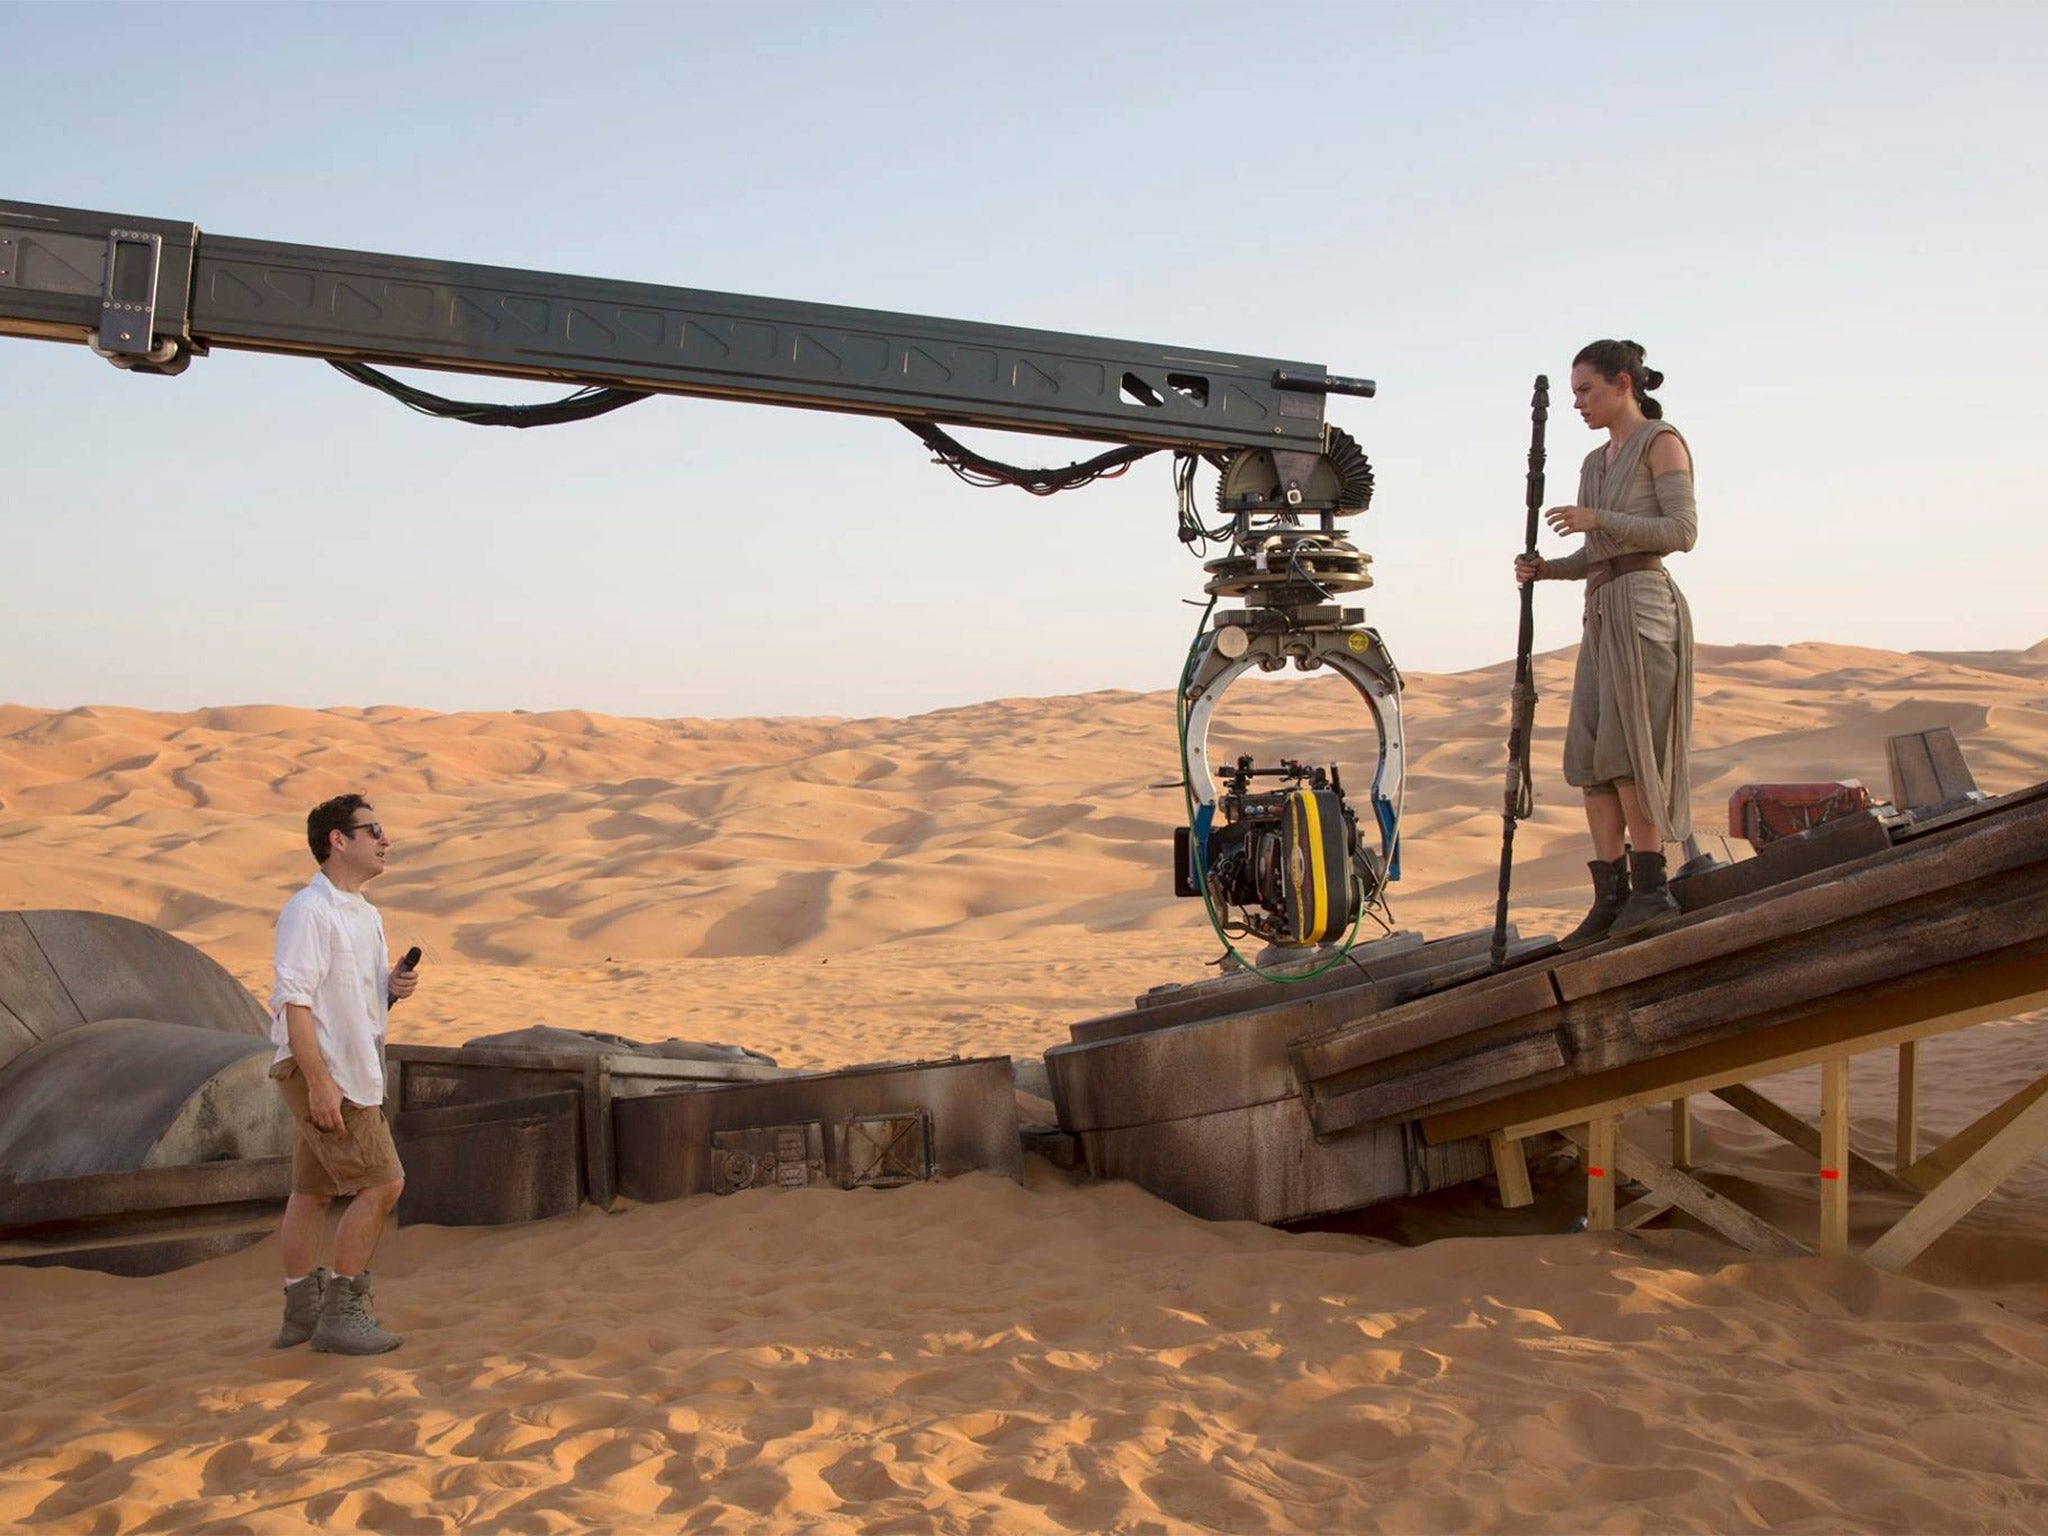 'Star Wars: The Force Awakens' director JJ Abrams on set with Daisy Ridley